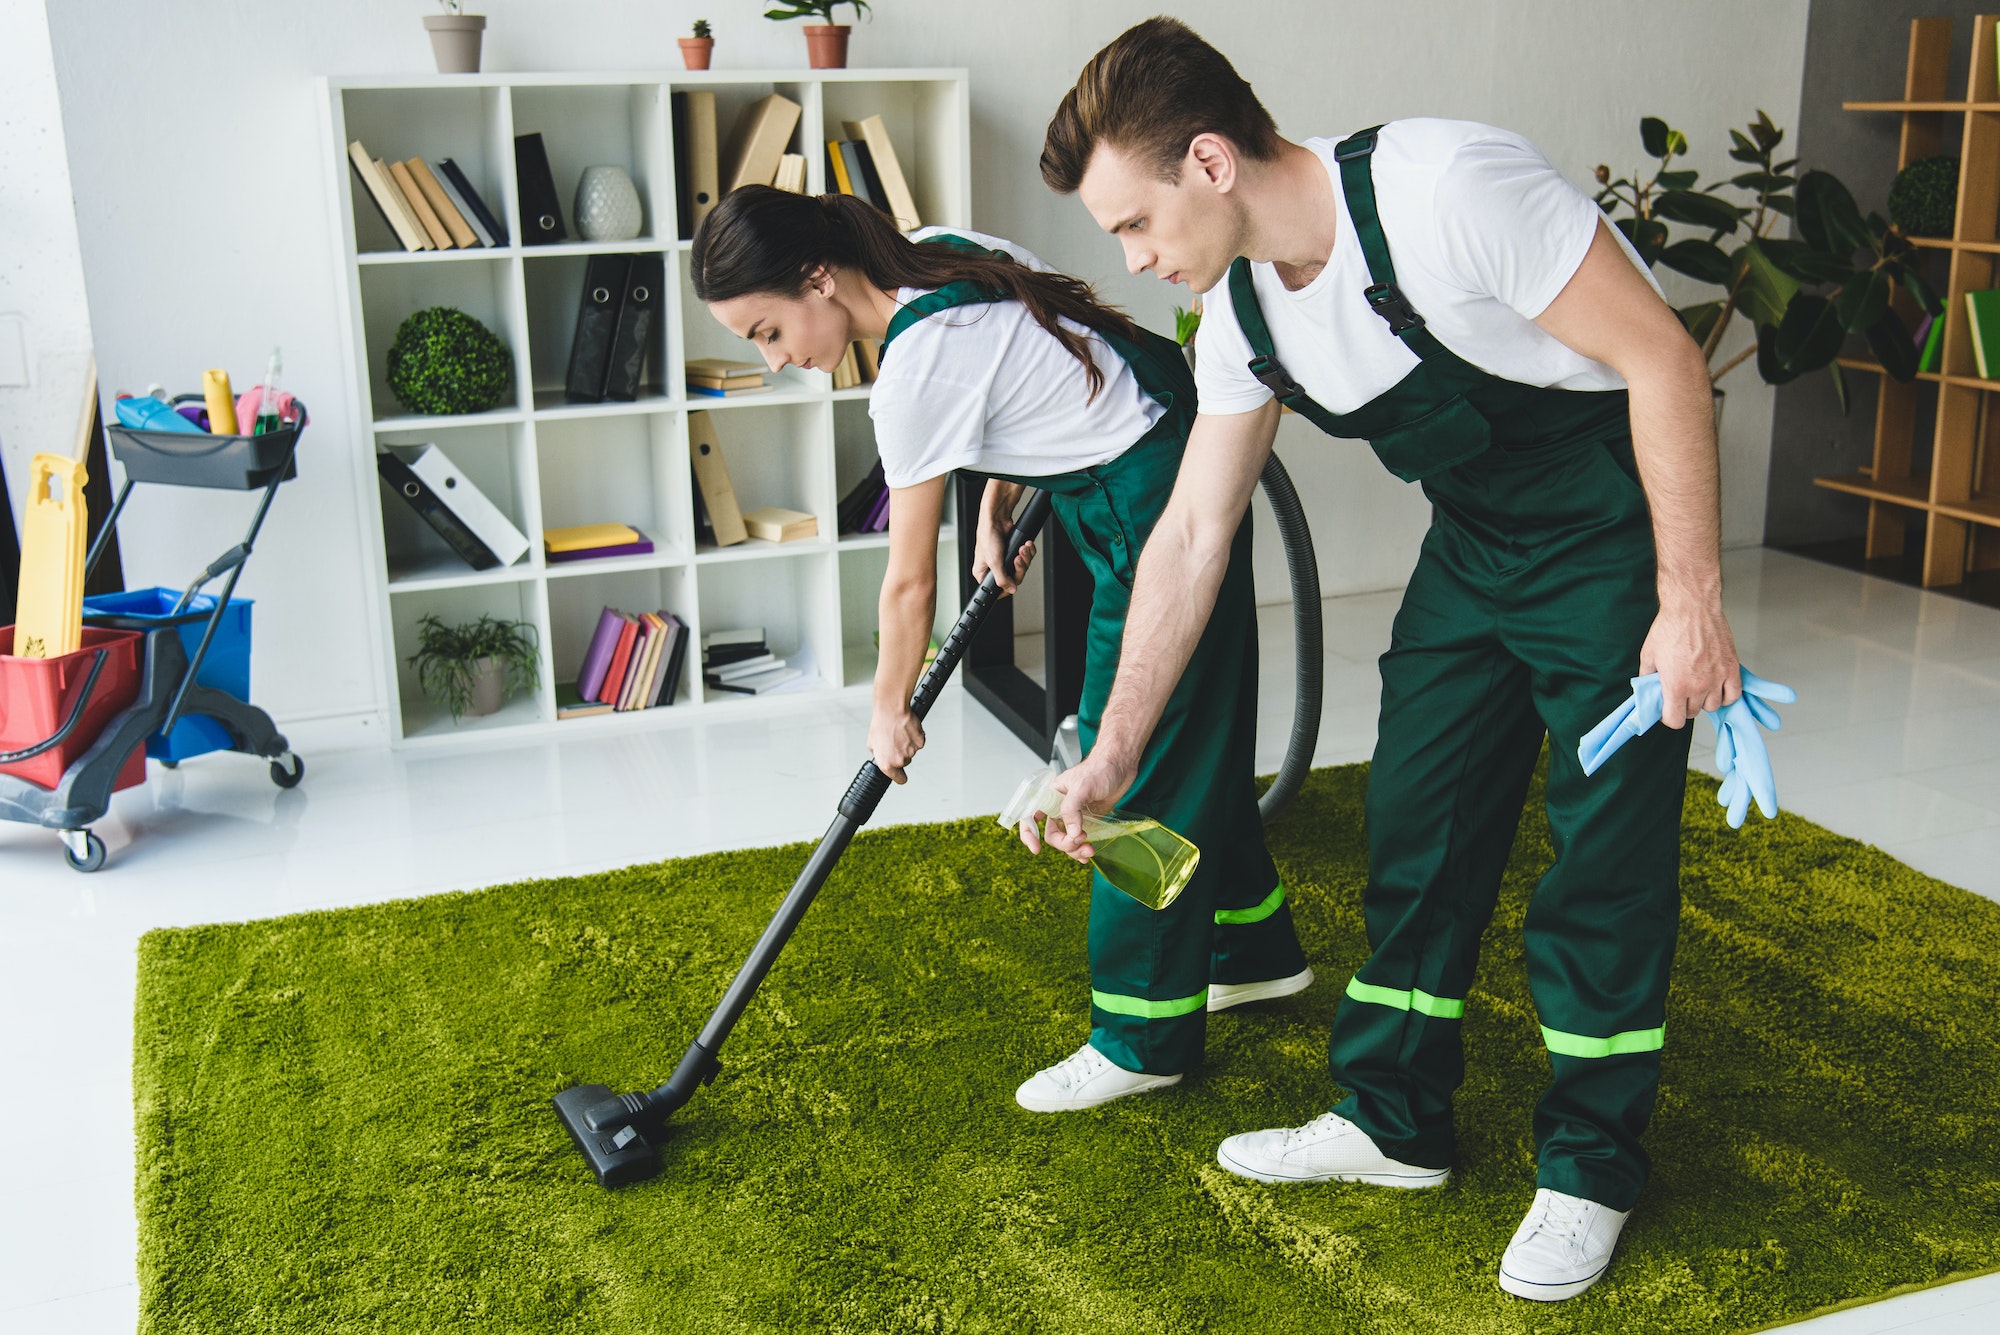 young cleaning company workers cleaning carpet with vacuum cleaner and detergent spray